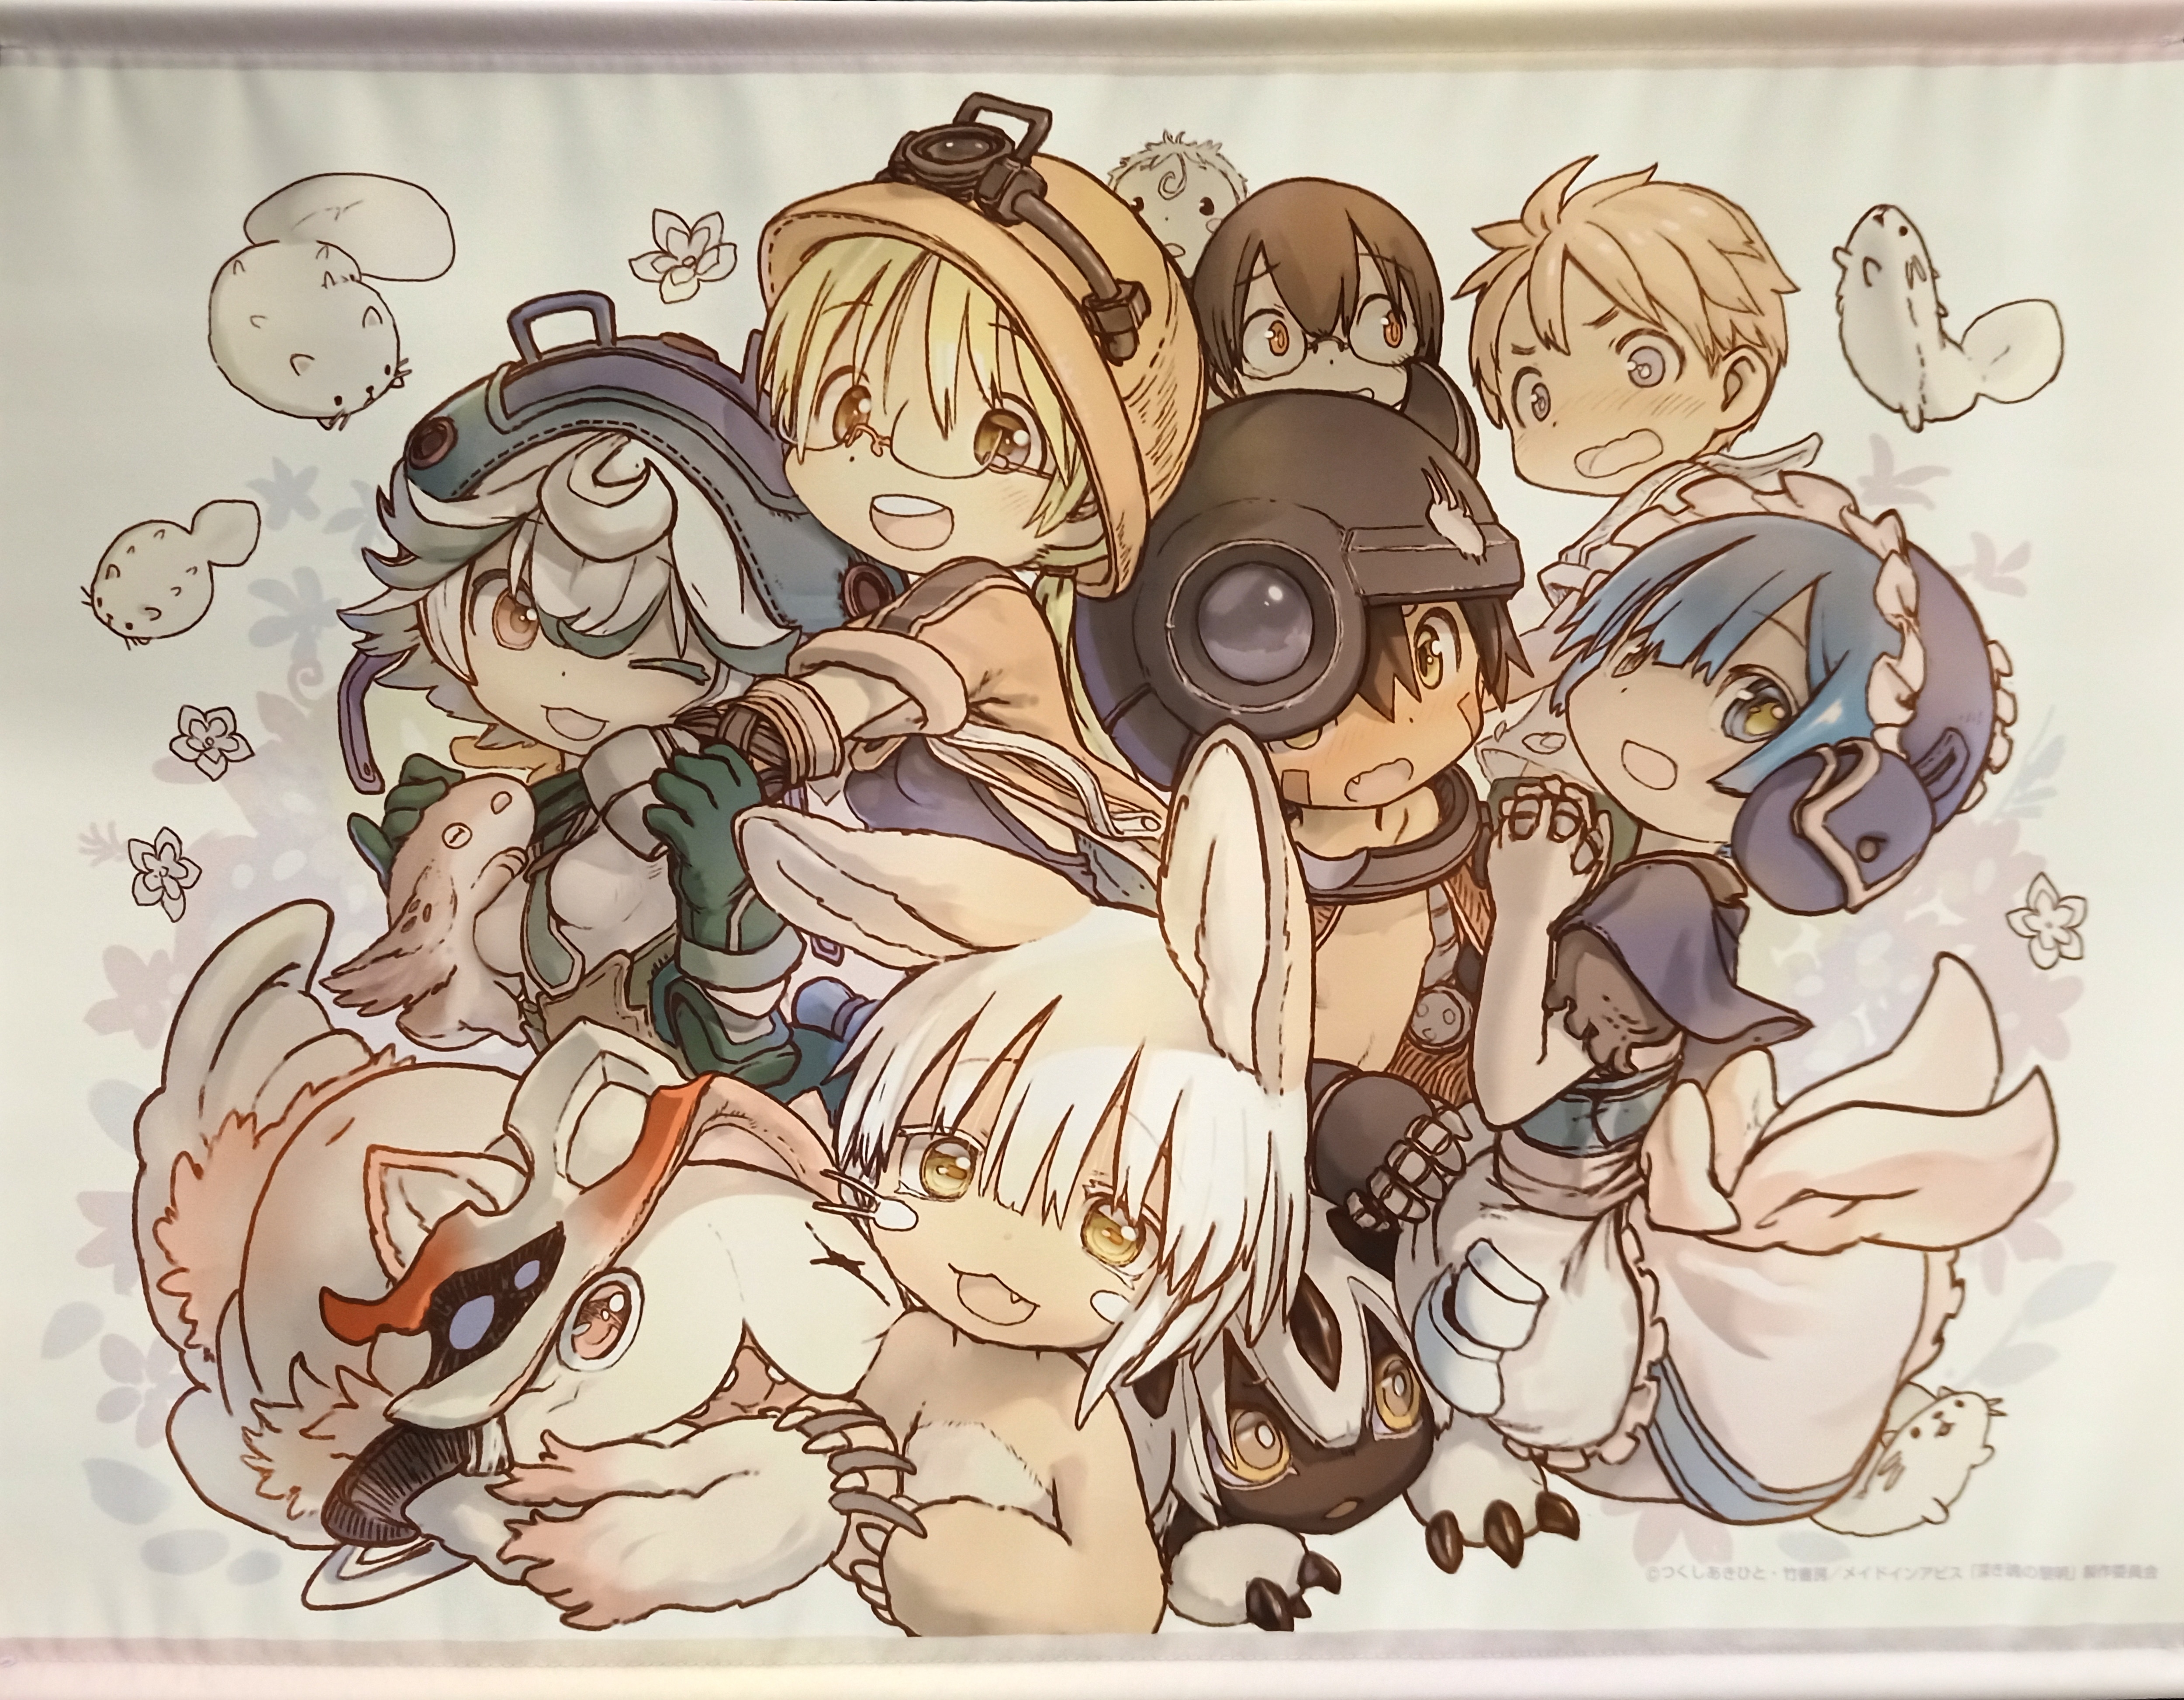 Made In Abyss - fanbook by Akihito Tsukushi